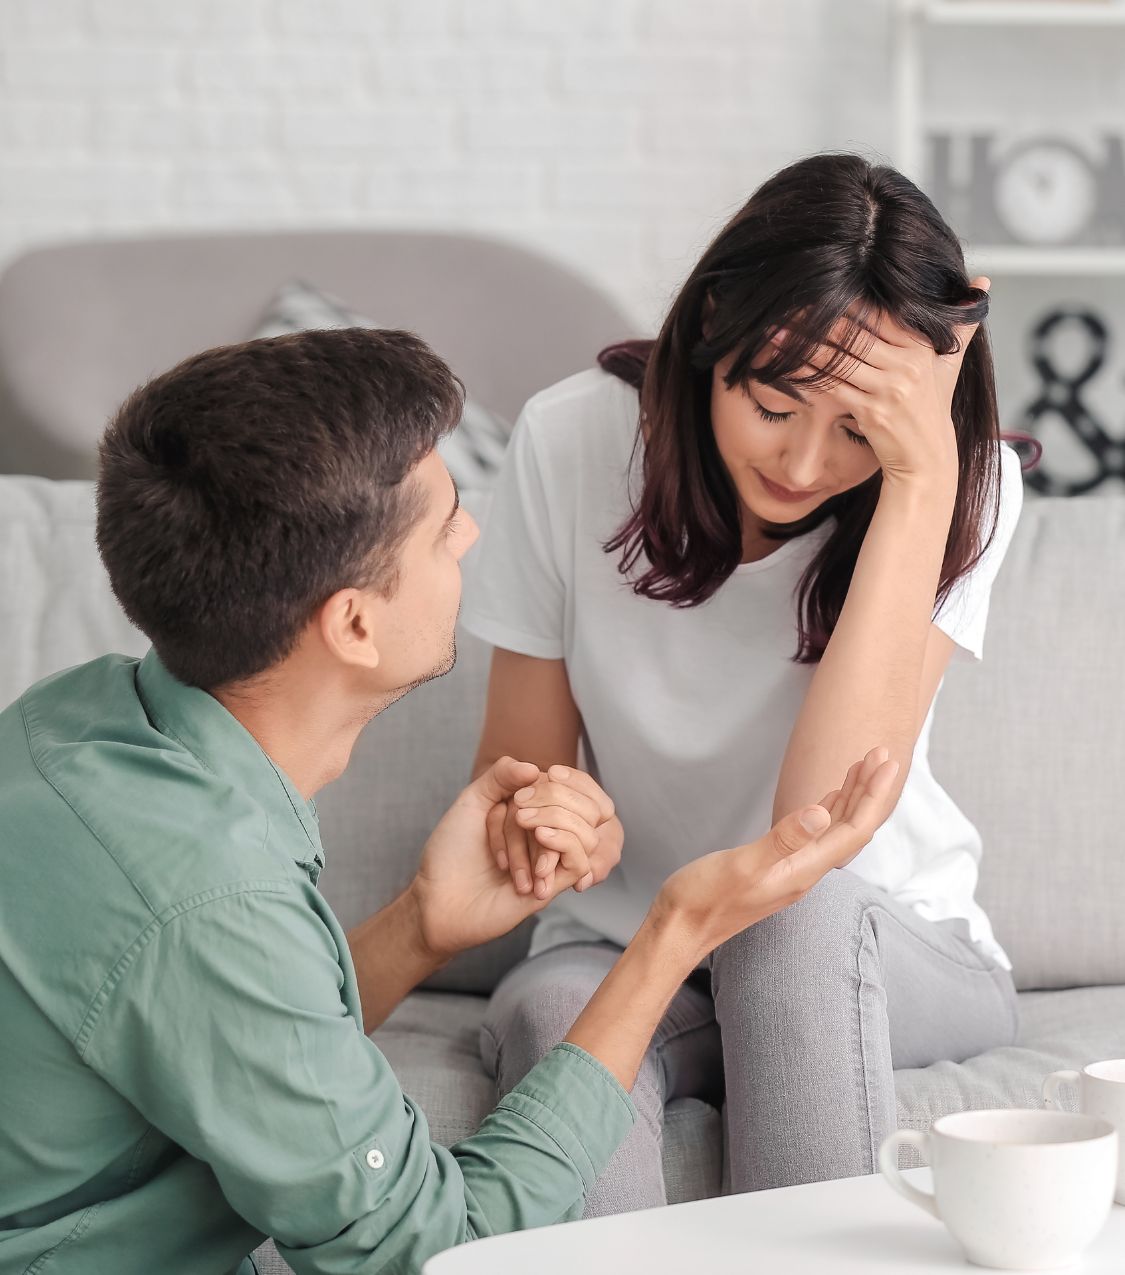 A man kneels next to his sitting wife, symbolizing reconciliation after infidelity. Relationship Experts LLC helps couples avoid common mistakes and survive infidelity, offering services in Ohio, the USA, Canada, the UK, Australia, and globally. Schedule a free consultation today!